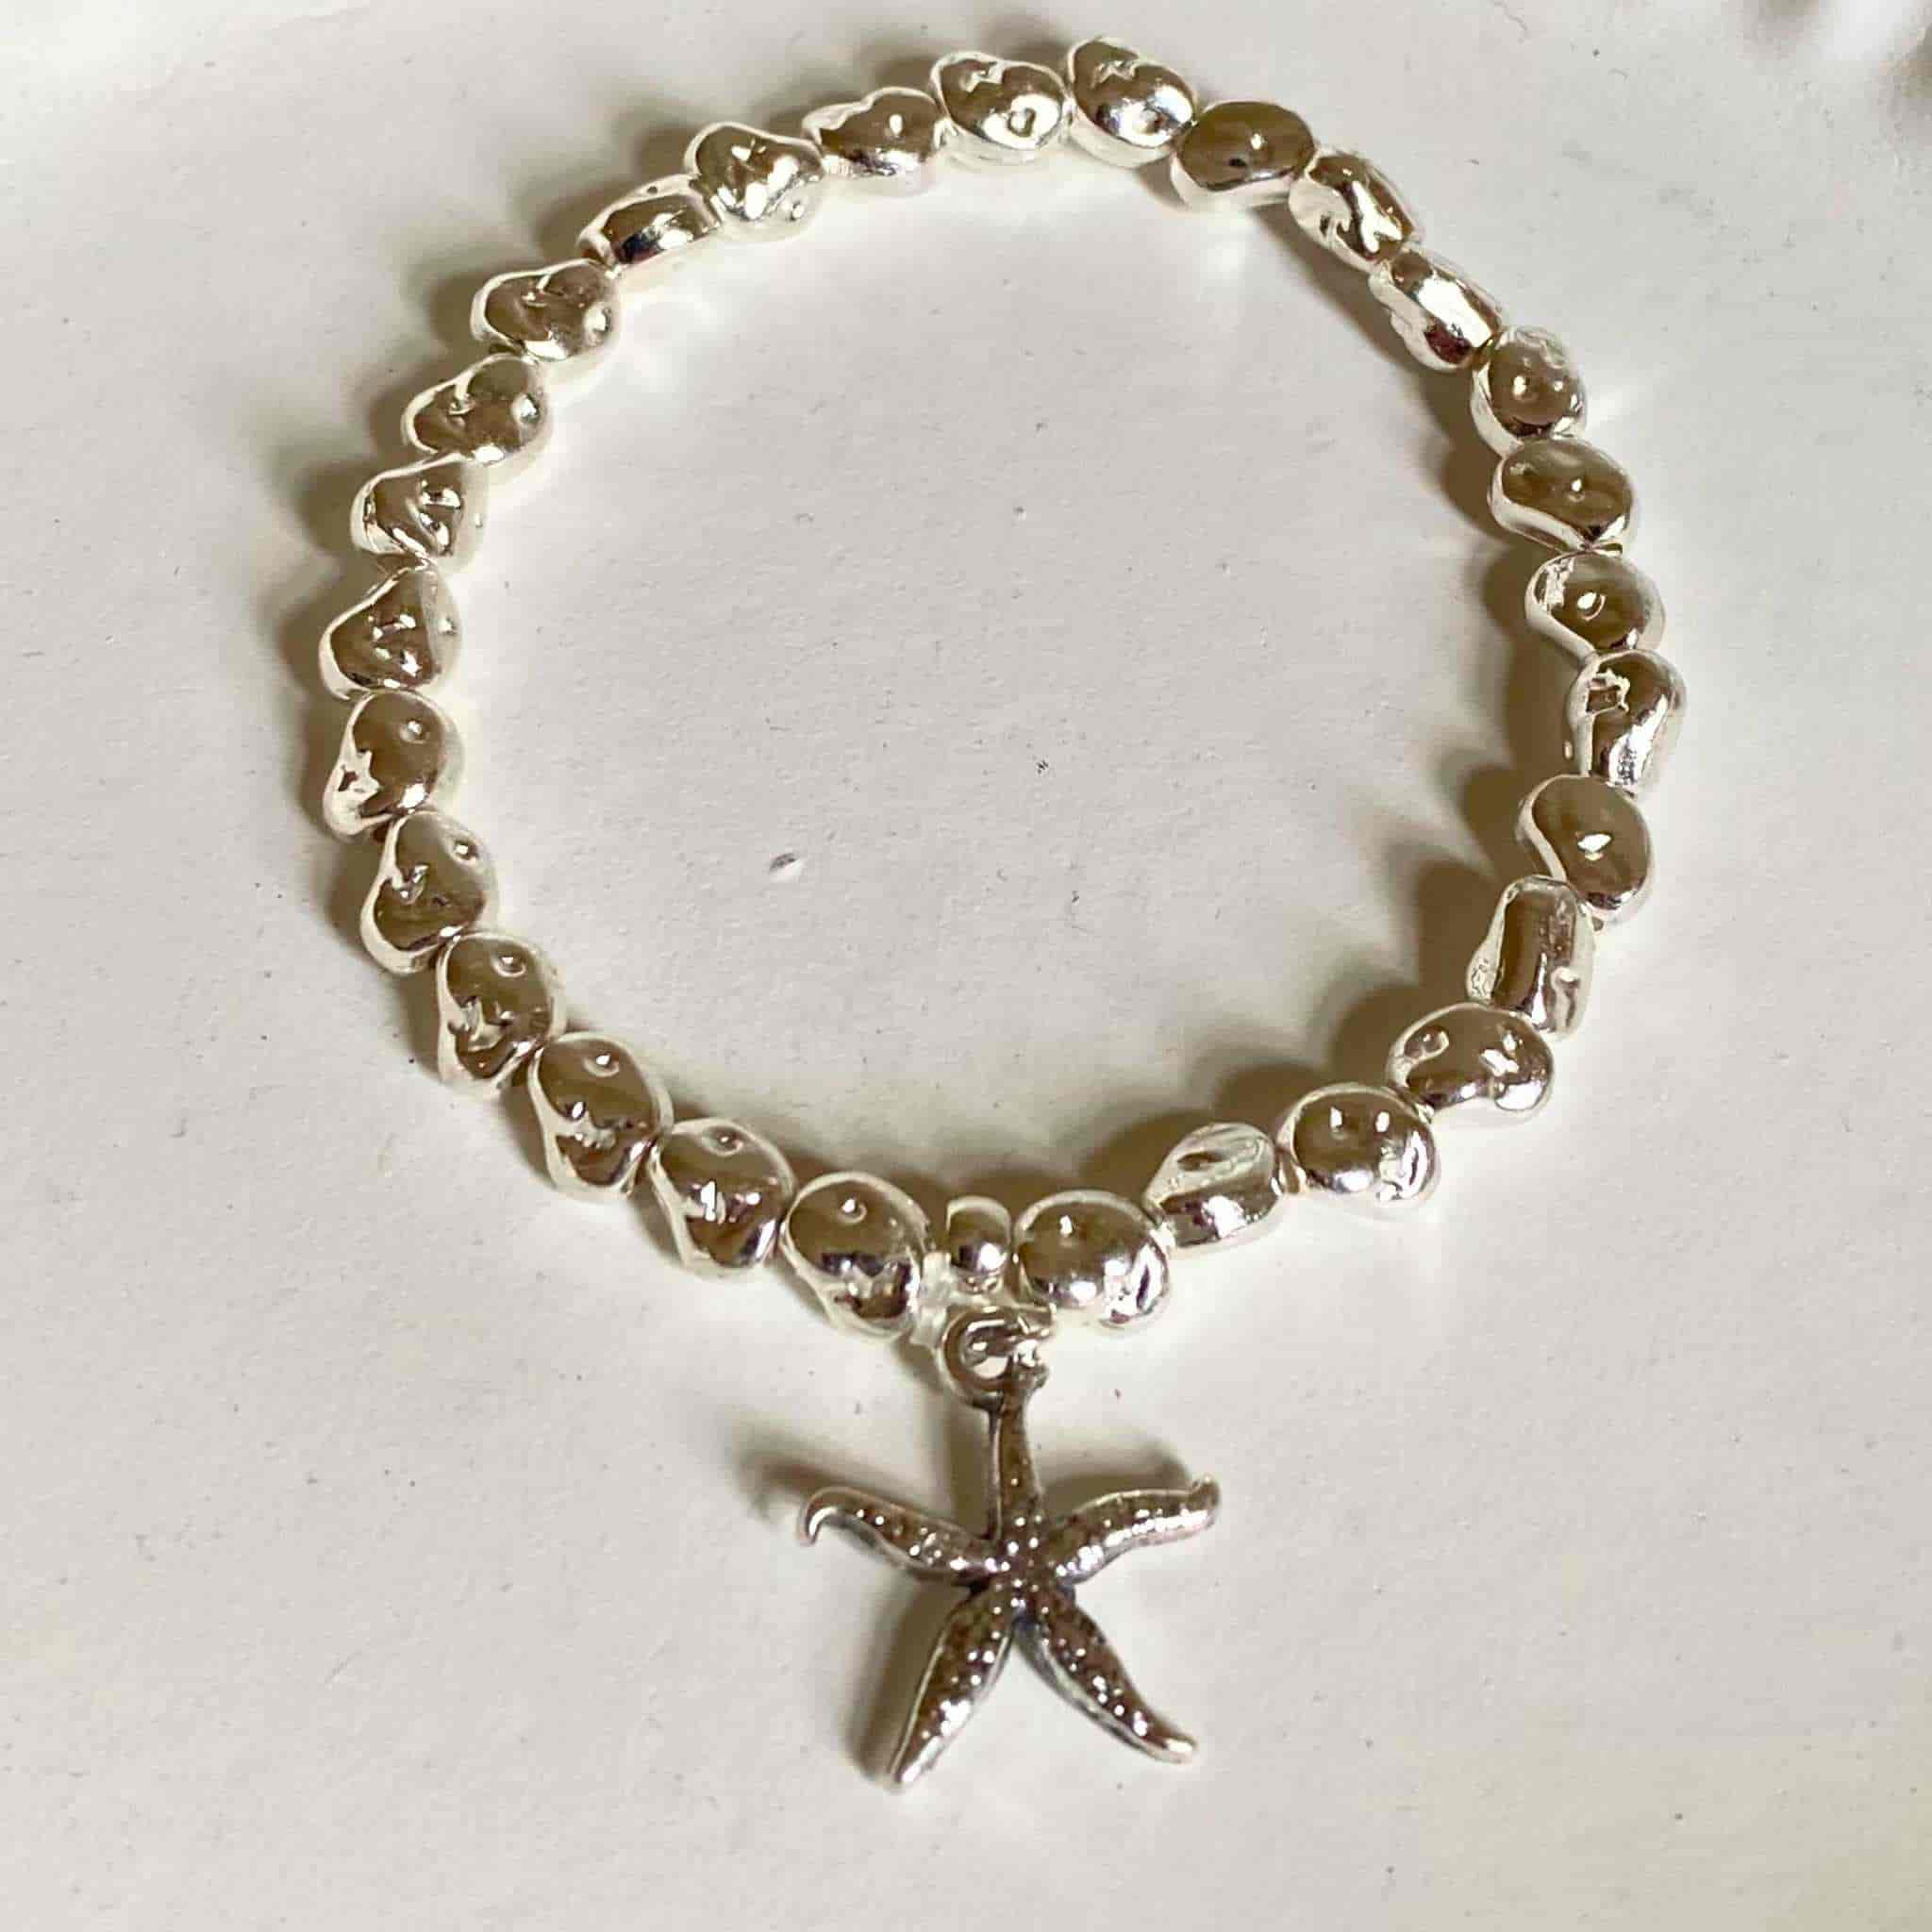 Elasticated Nugget Bracelet with Starfish Charm